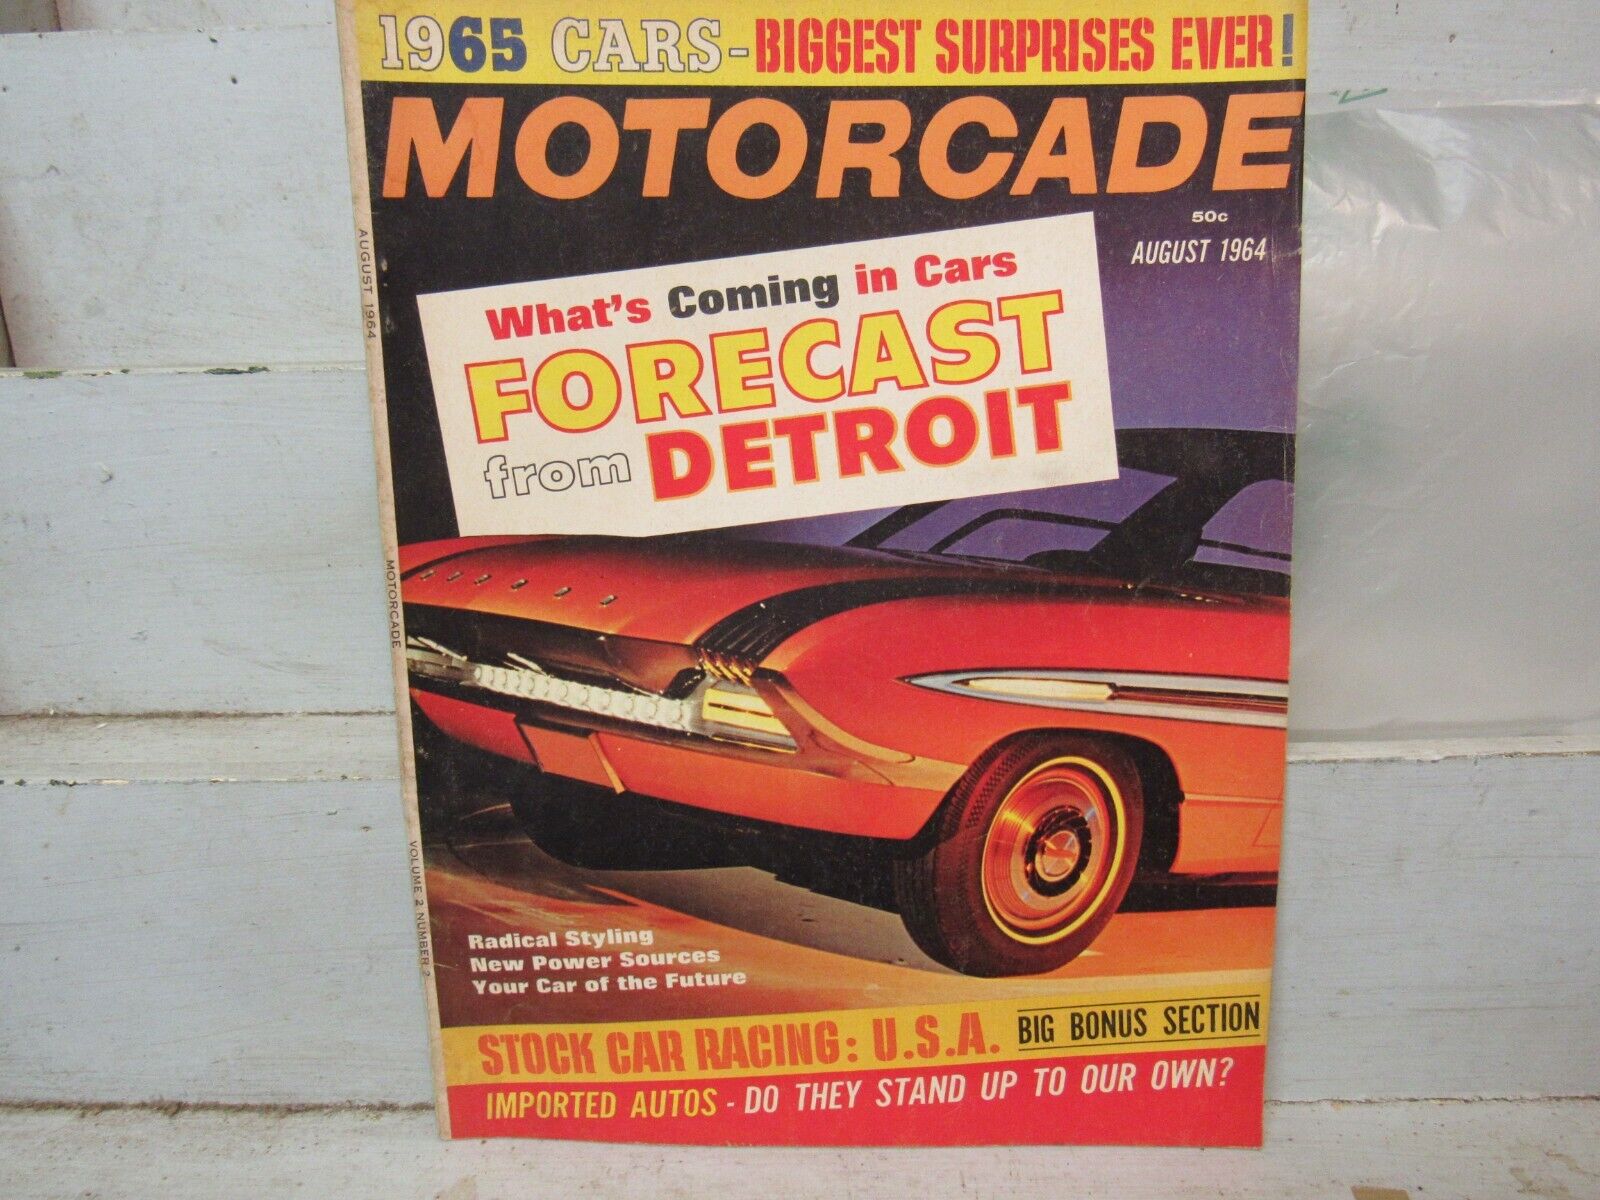 MOTORCADE August 1964: FORCAST FROM DETROIT, \'65 CARS, STOCK CAR RACING, IMPORTS